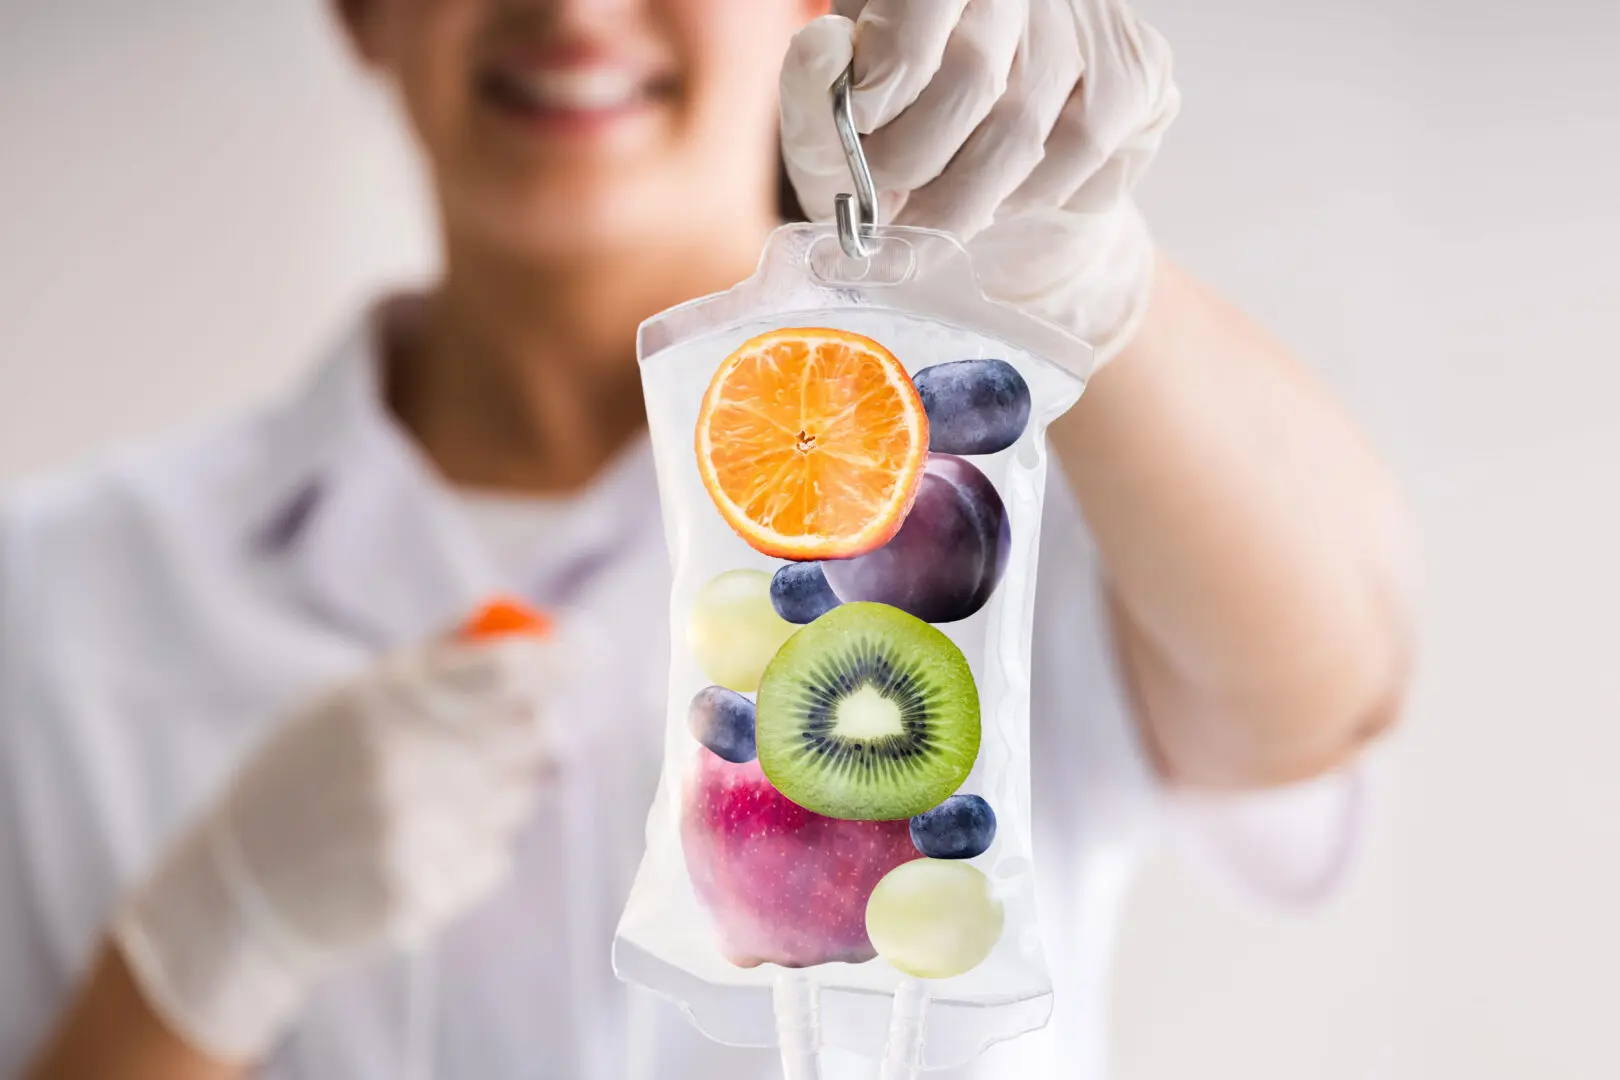 A person holding an iv bag filled with fruit.